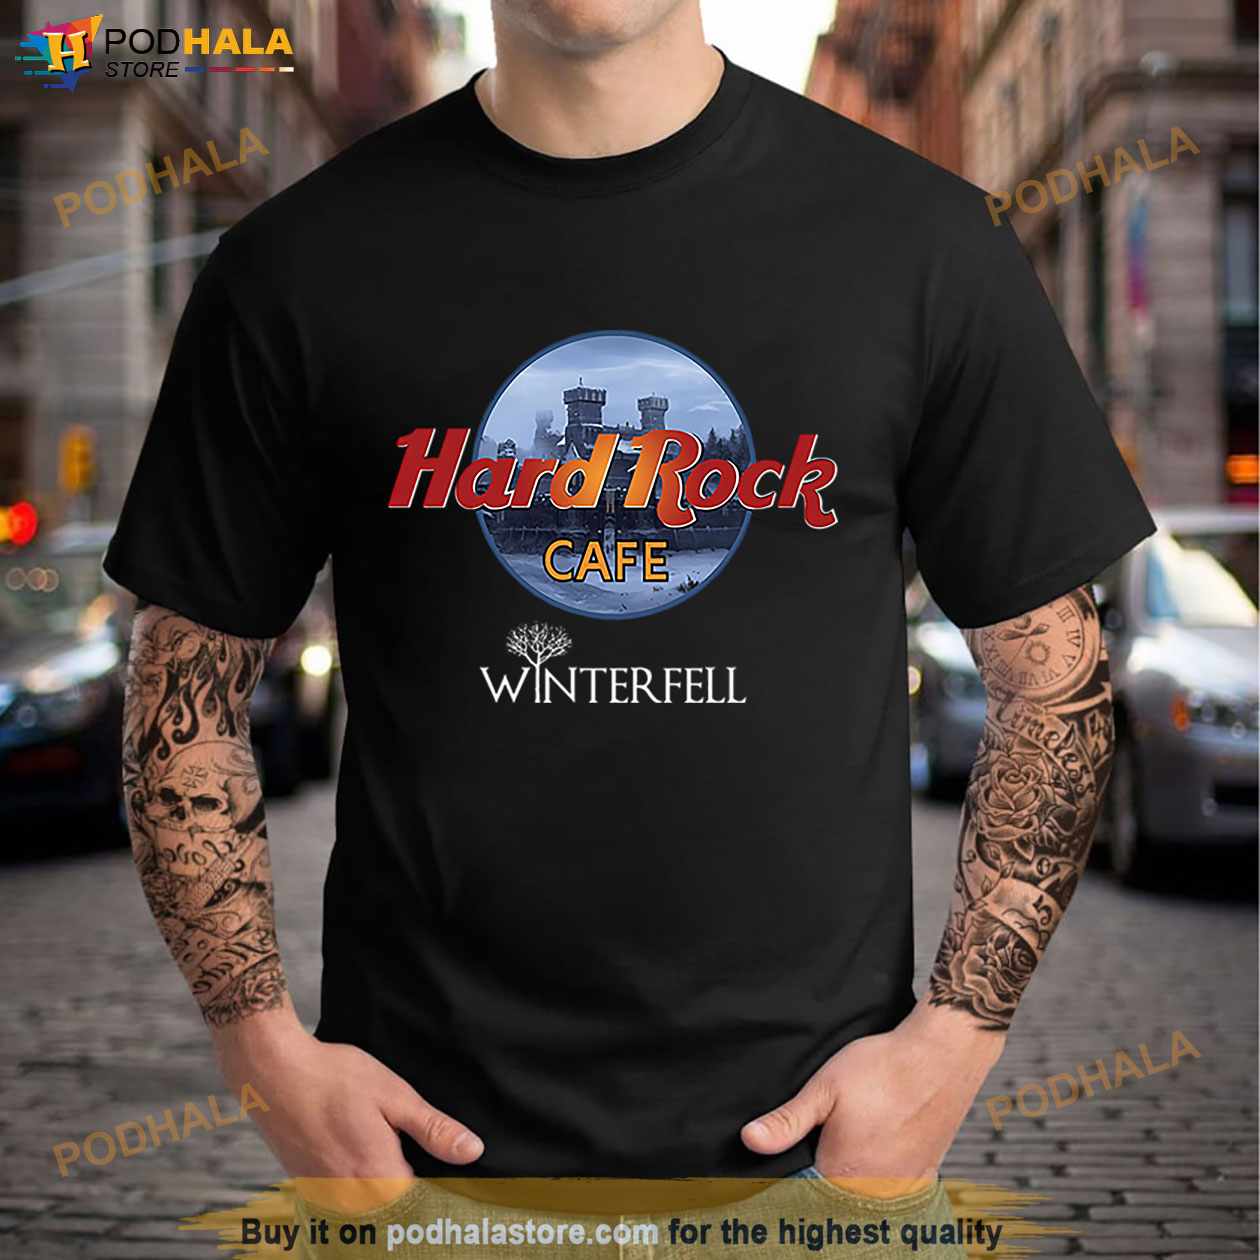 Hard Rock Winterfell Cafe T Shirt Bring Your Ideas, Thoughts And Imaginations Into Reality Today